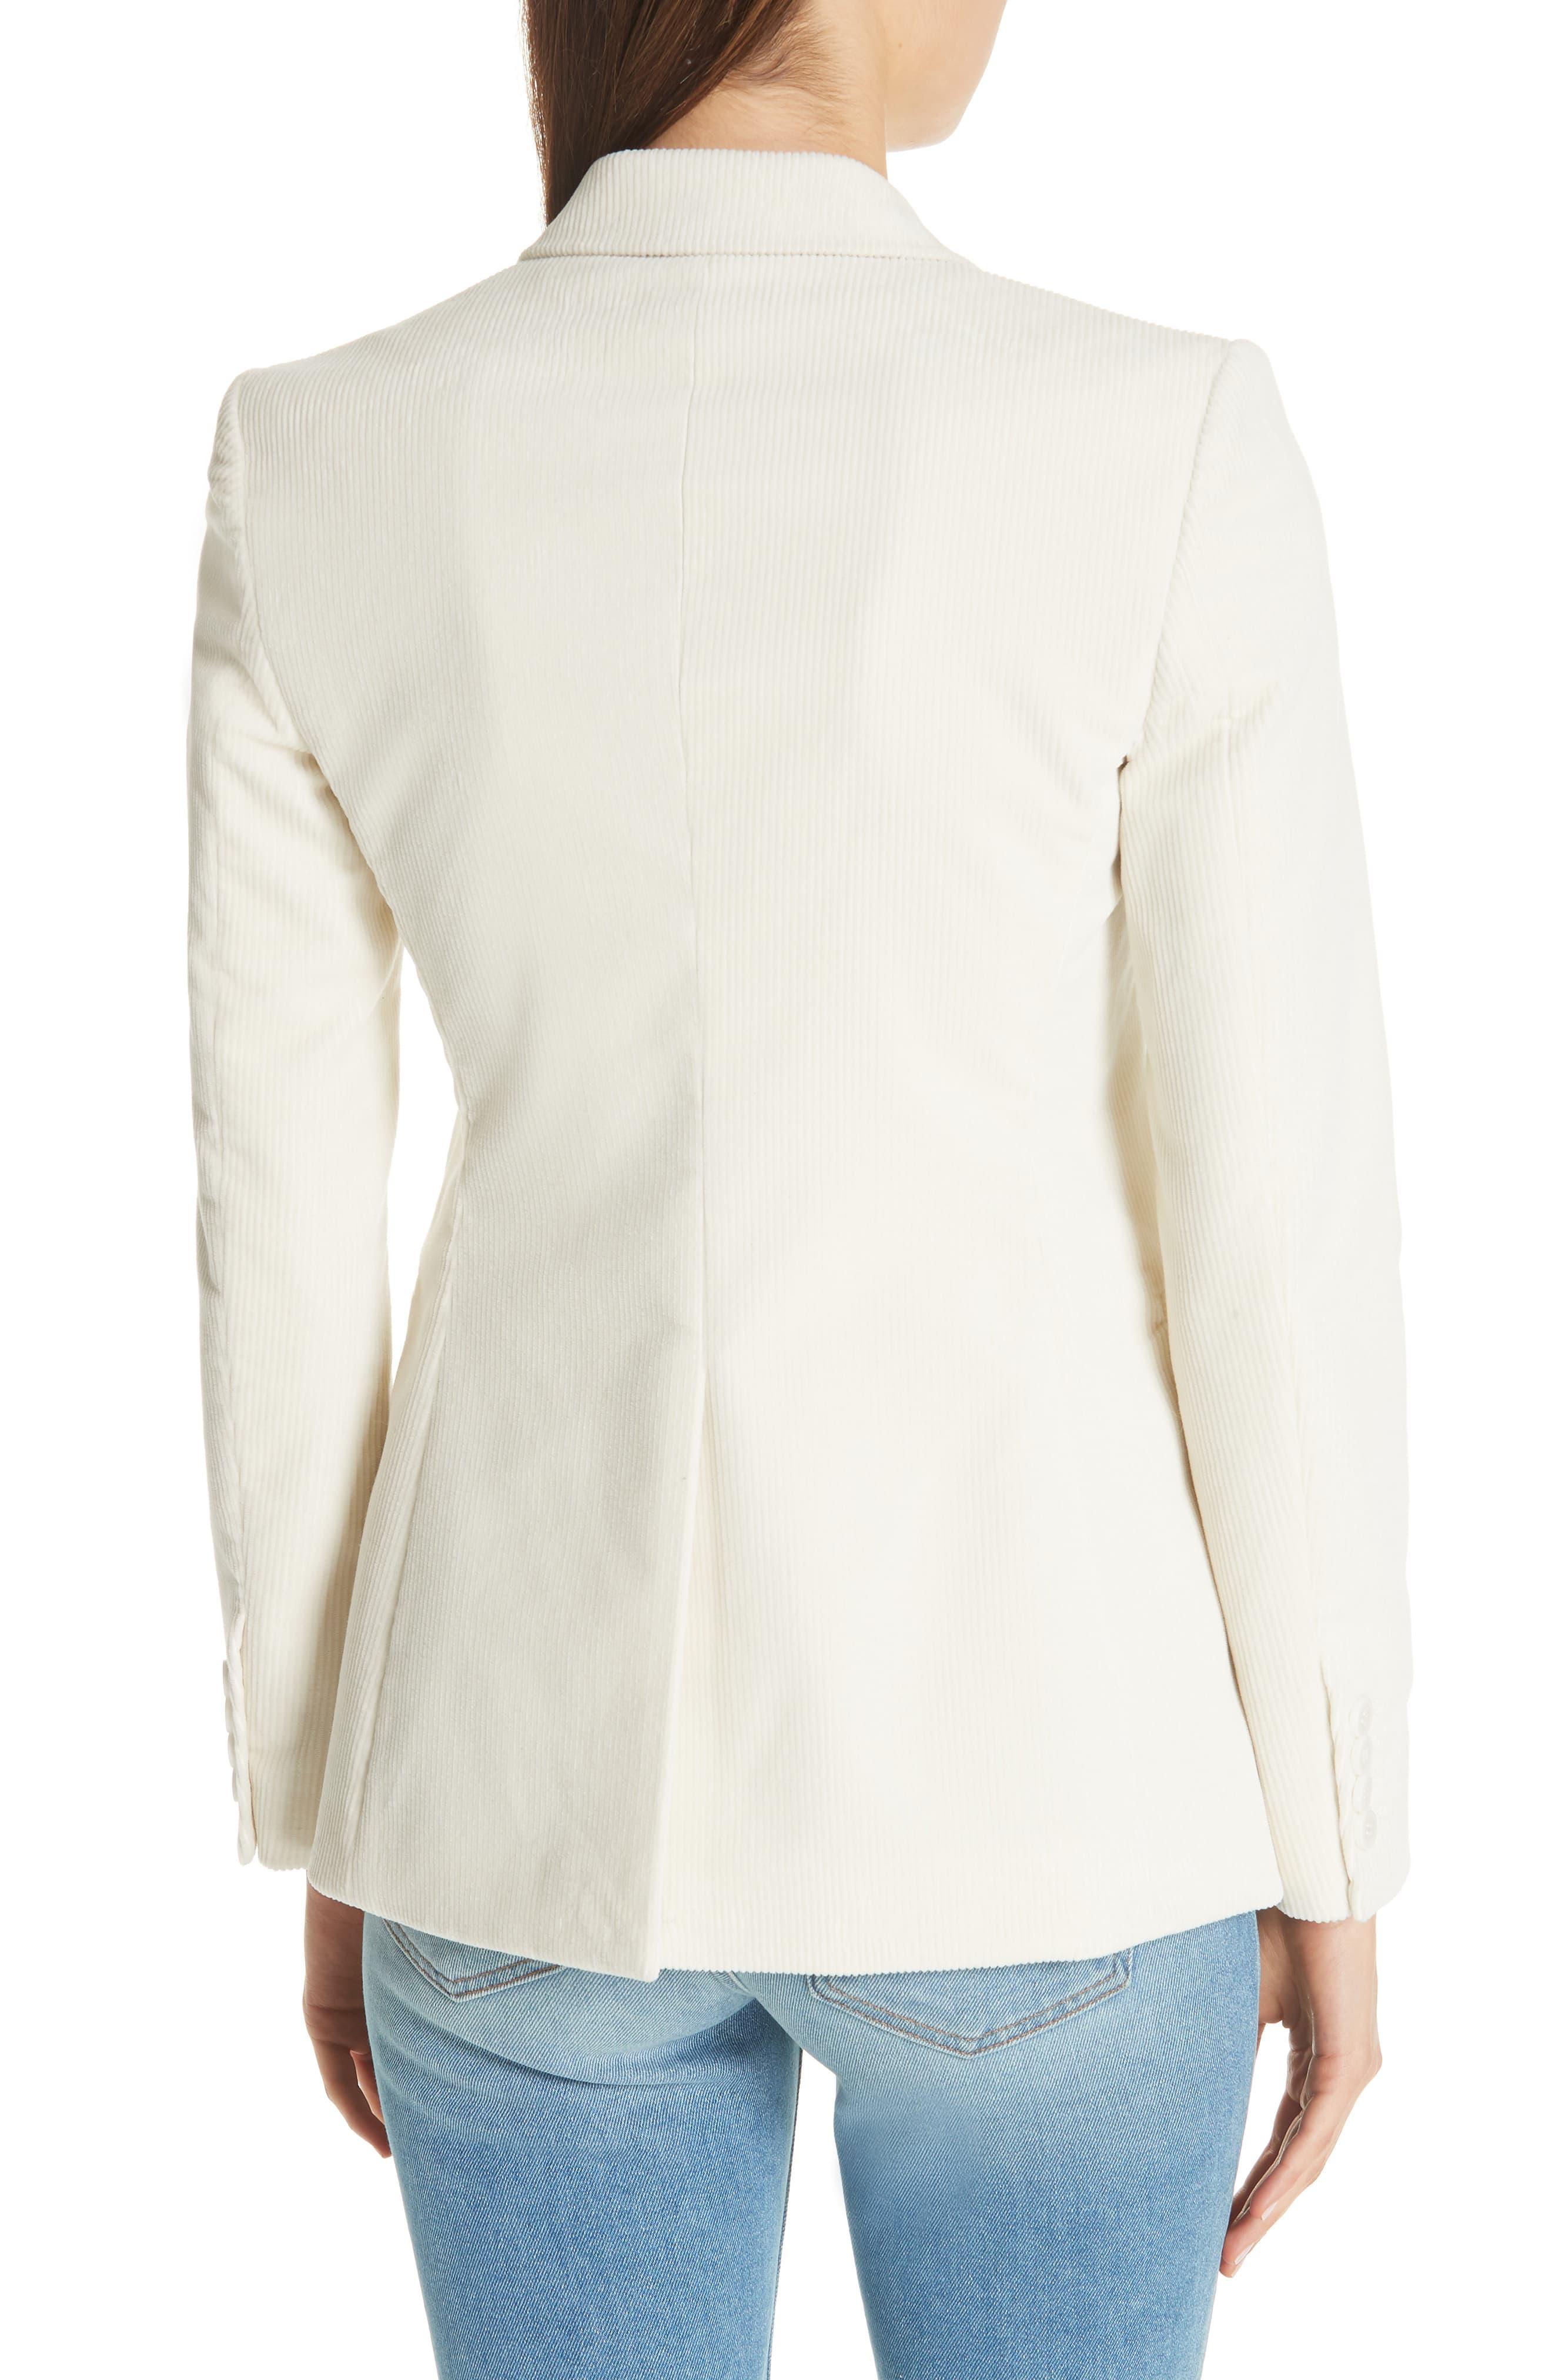 Theory Corduroy Power Jacket in White - Lyst